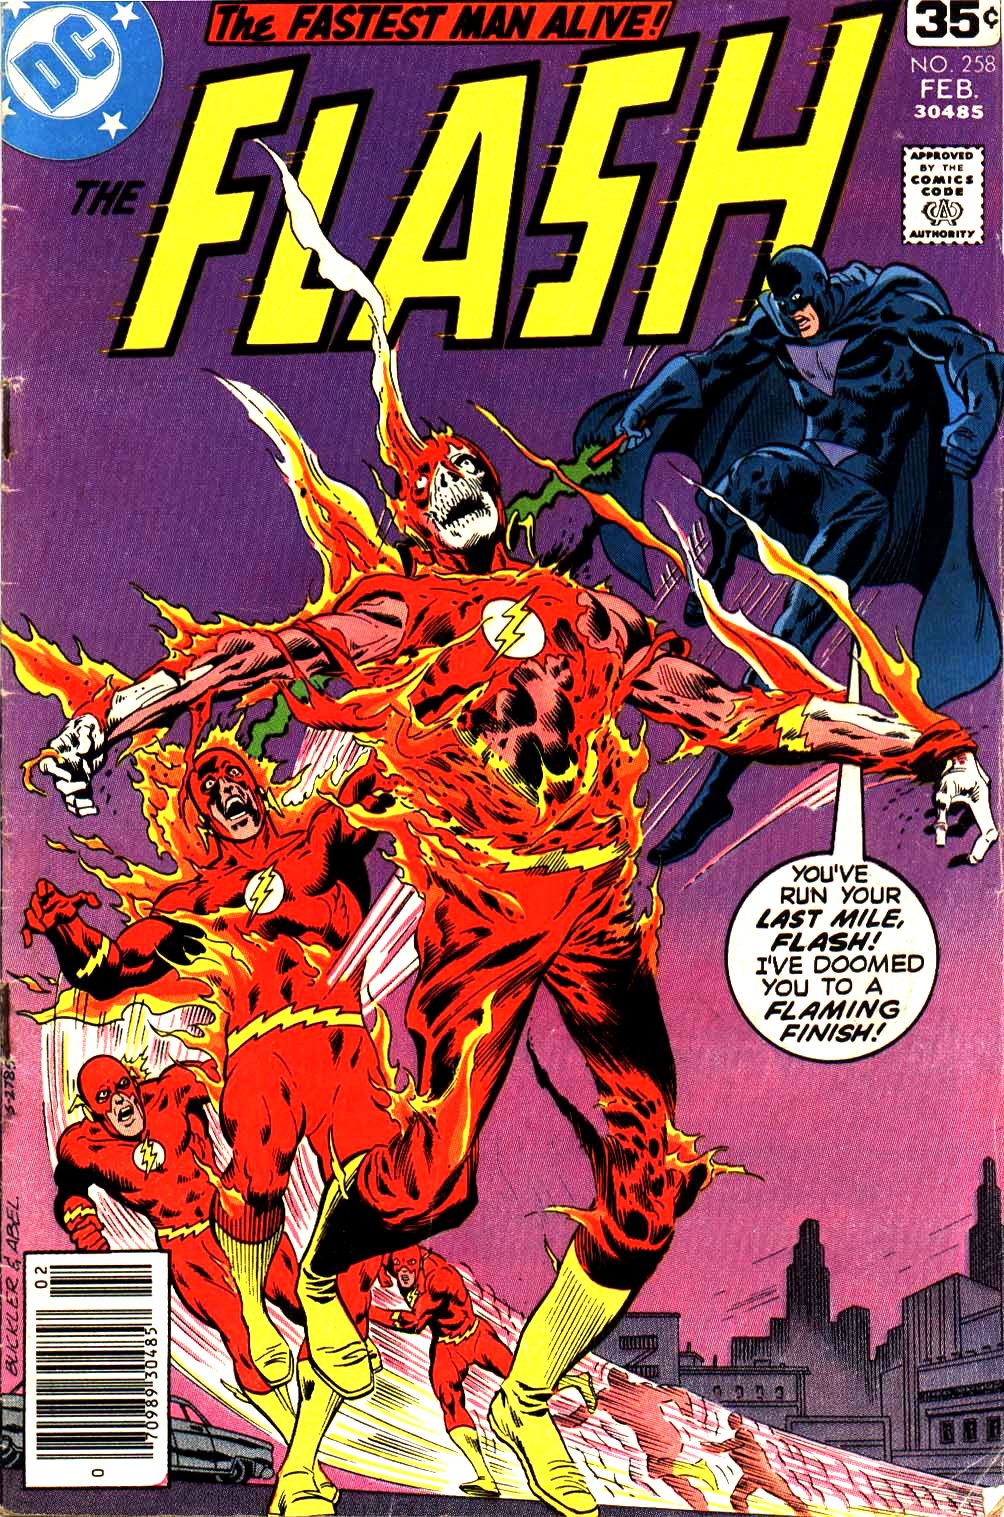 CRACK! POW! WHAM!: Gallery of Great Comic Book Covers: THE FLASH #258